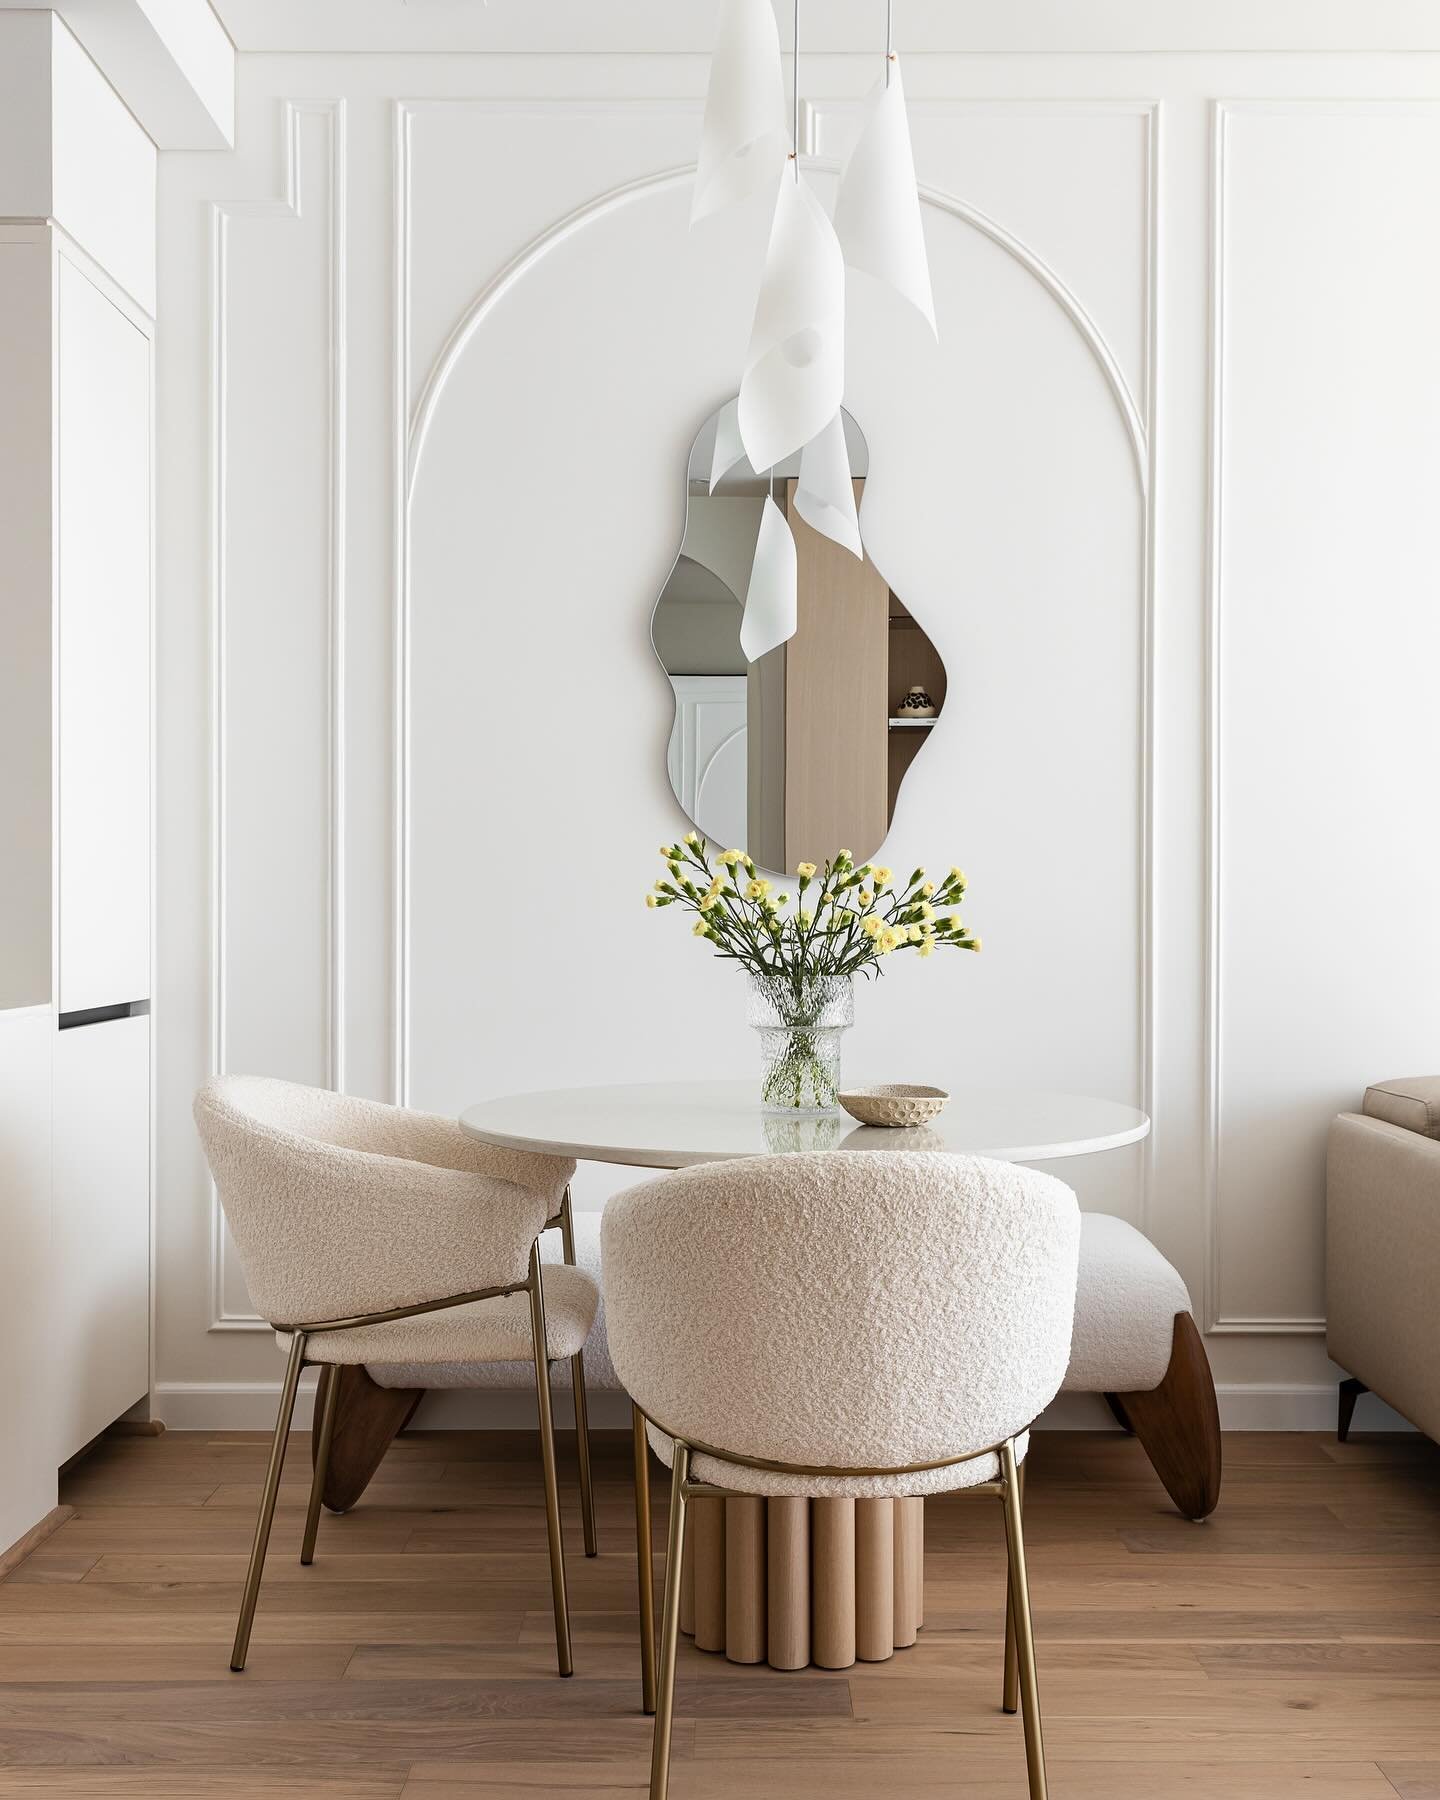 Client: give me modern organic elegance 
Us: 🪄 

Since the space wasn&rsquo;t large we wanted the dining area to be its own zone. We played with arched shape for the wall moulding and introduced an organic mirror as a focal point, creating an illusi